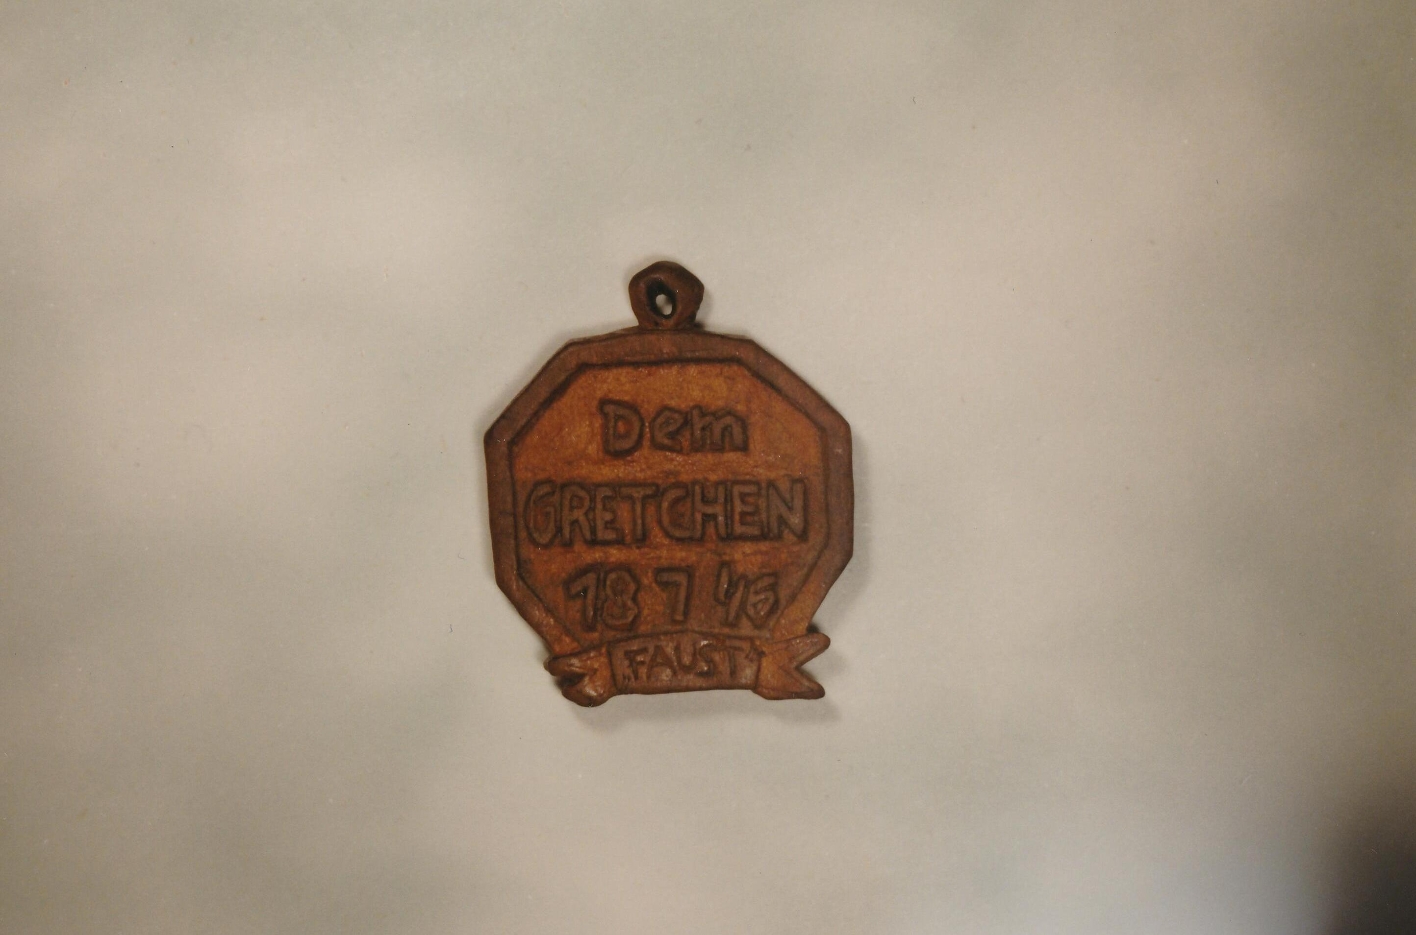 "Dein Gretchen, 18.7.46. Faust" is written on the back of the octagonal tag.